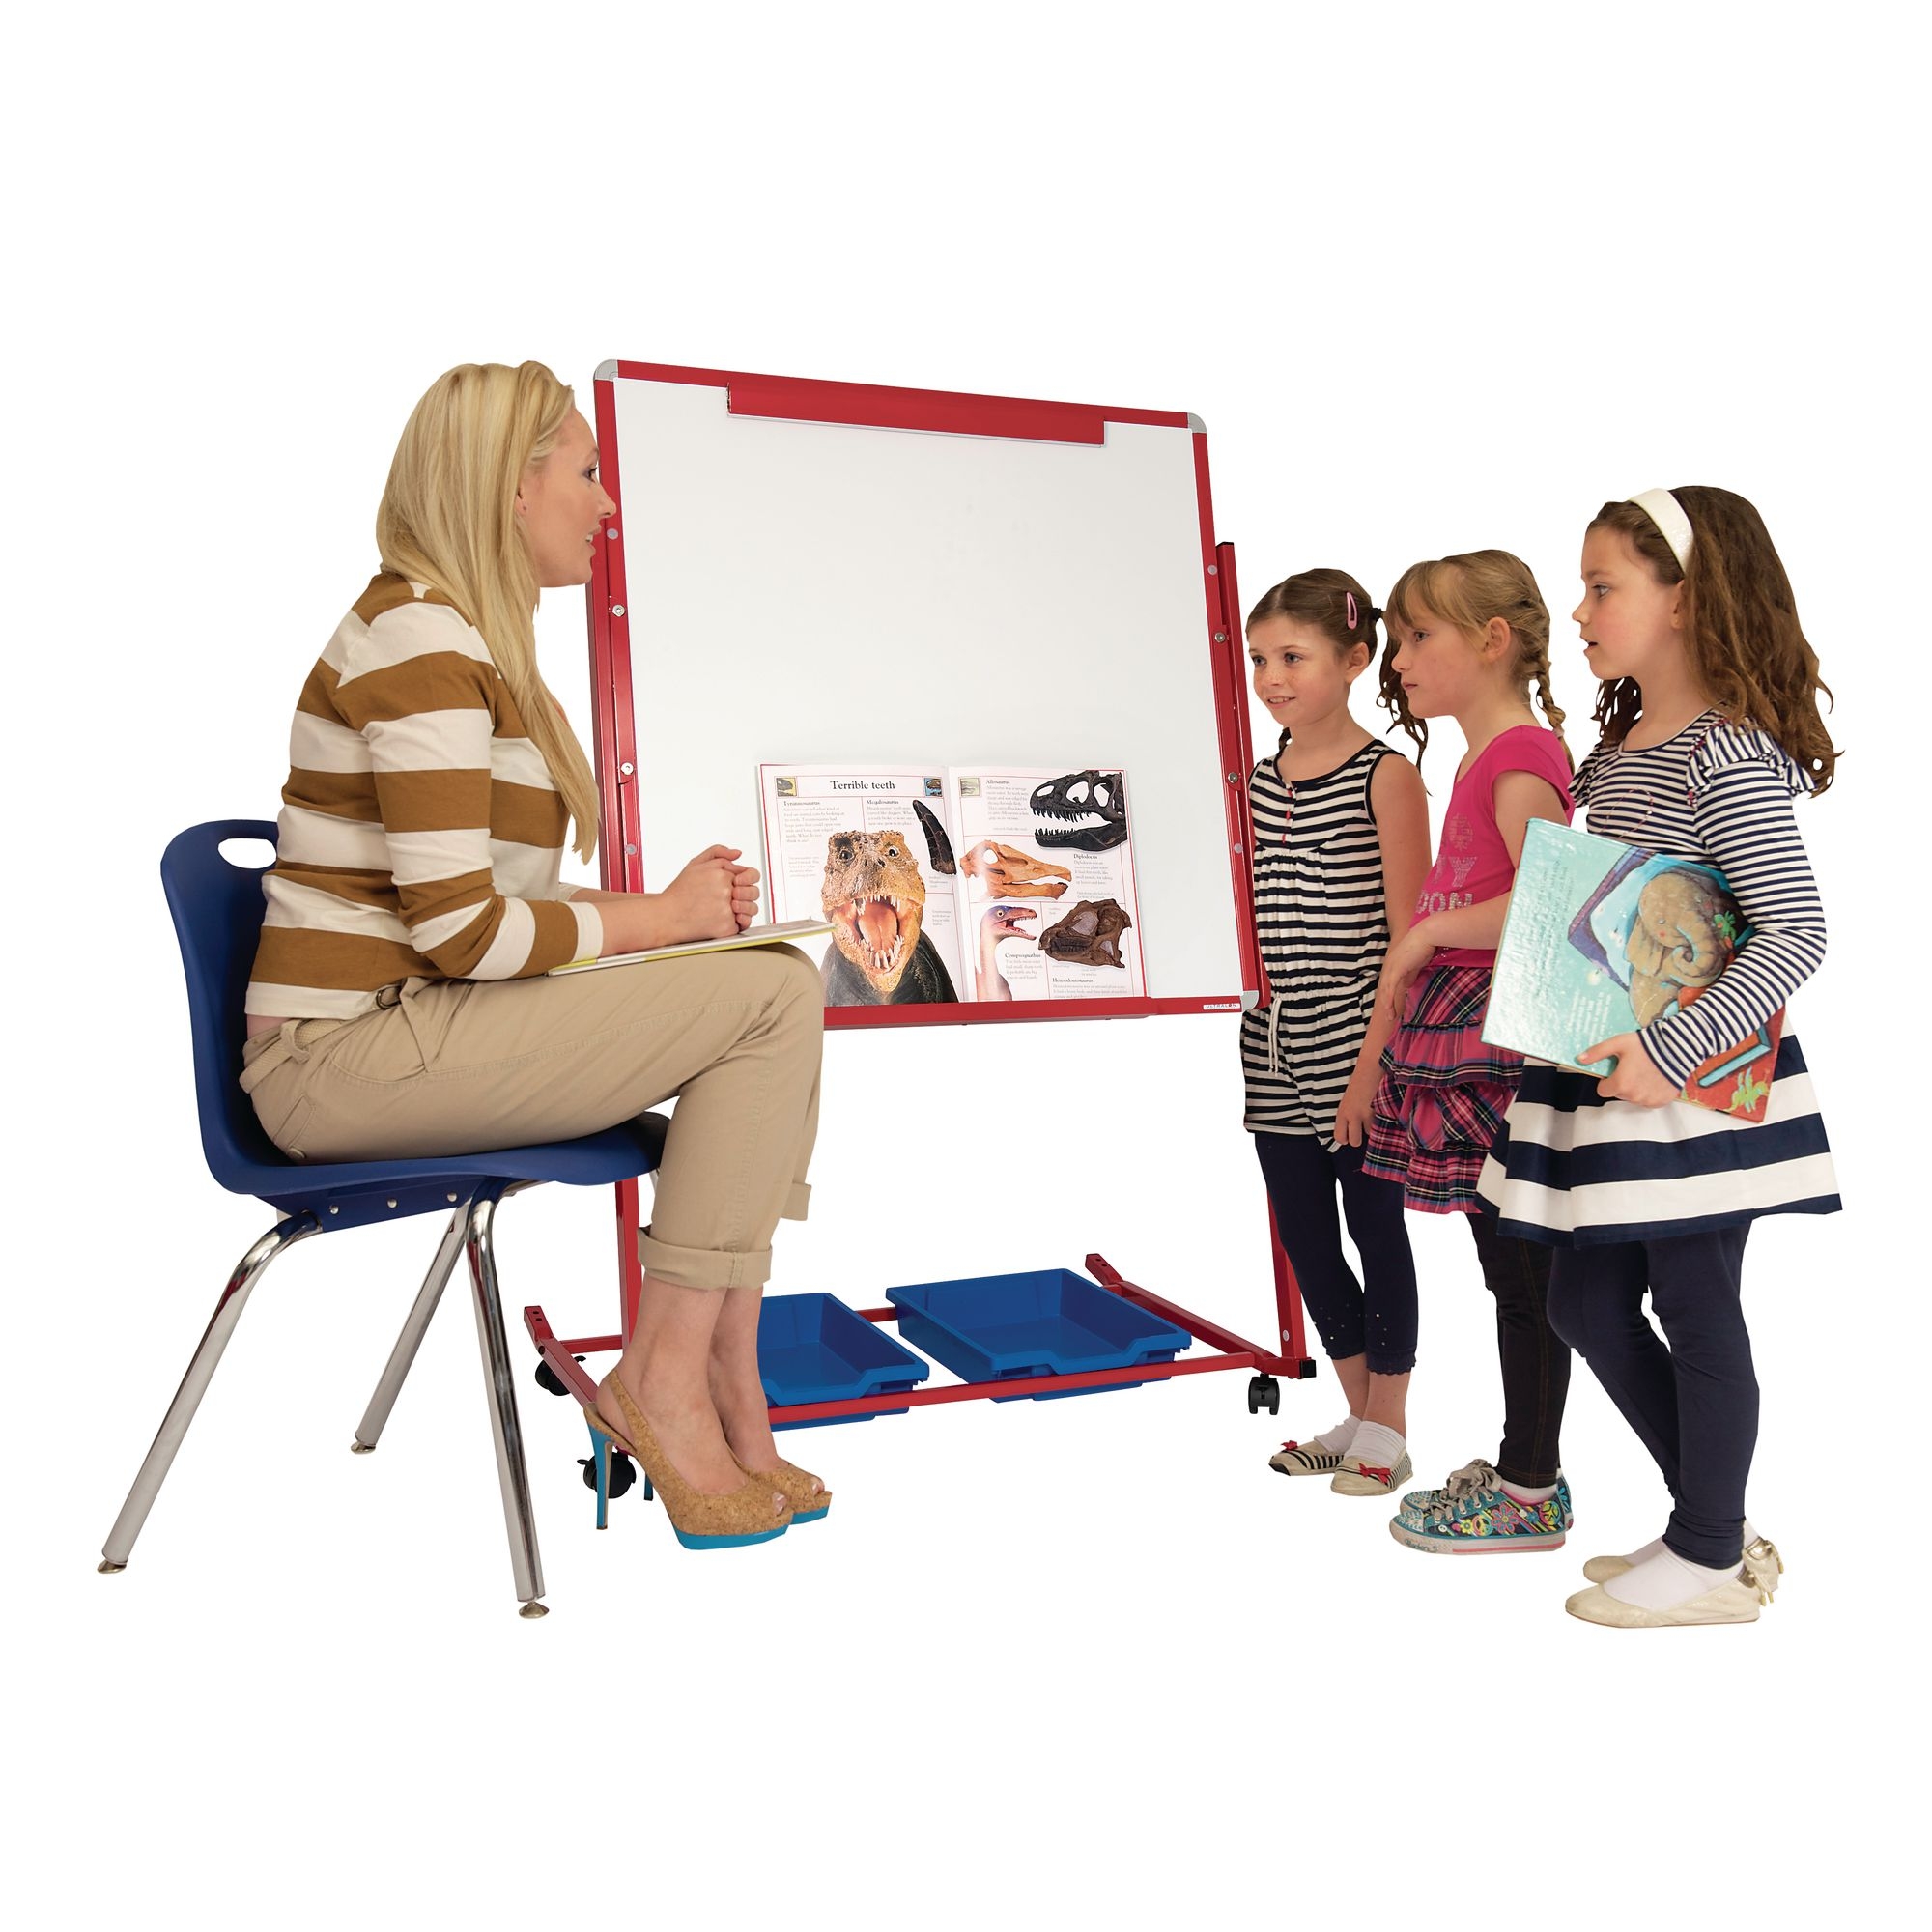 Single Sided Mobile Magnetic Display/ Storage Easel - Blue